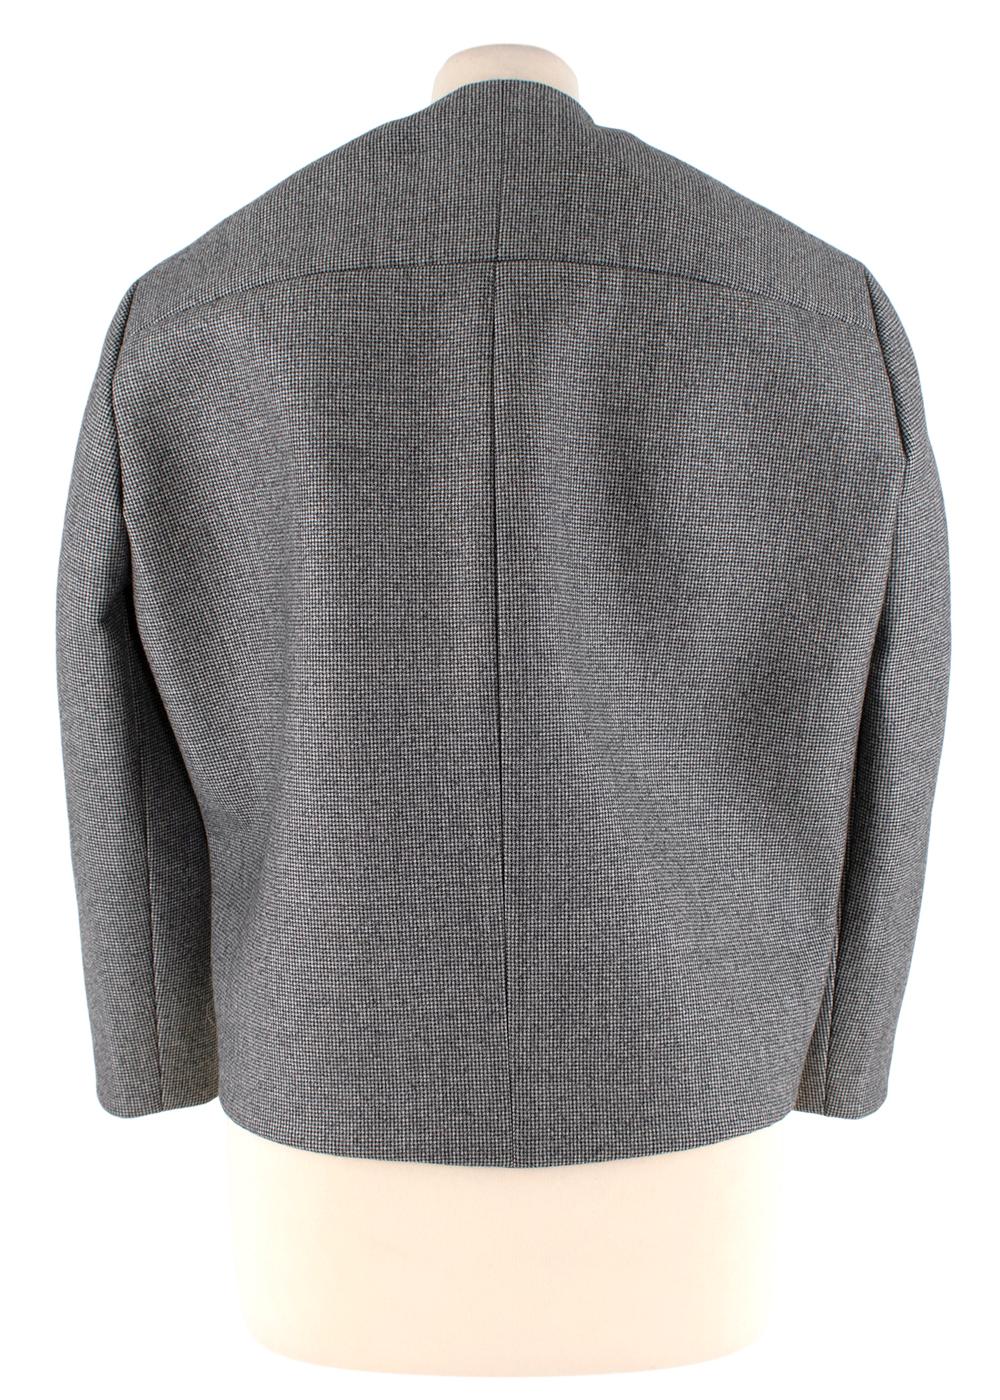 Gray Balenciaga Wool Houndstooth Structured Crop Jacket - Us size 6  For Sale